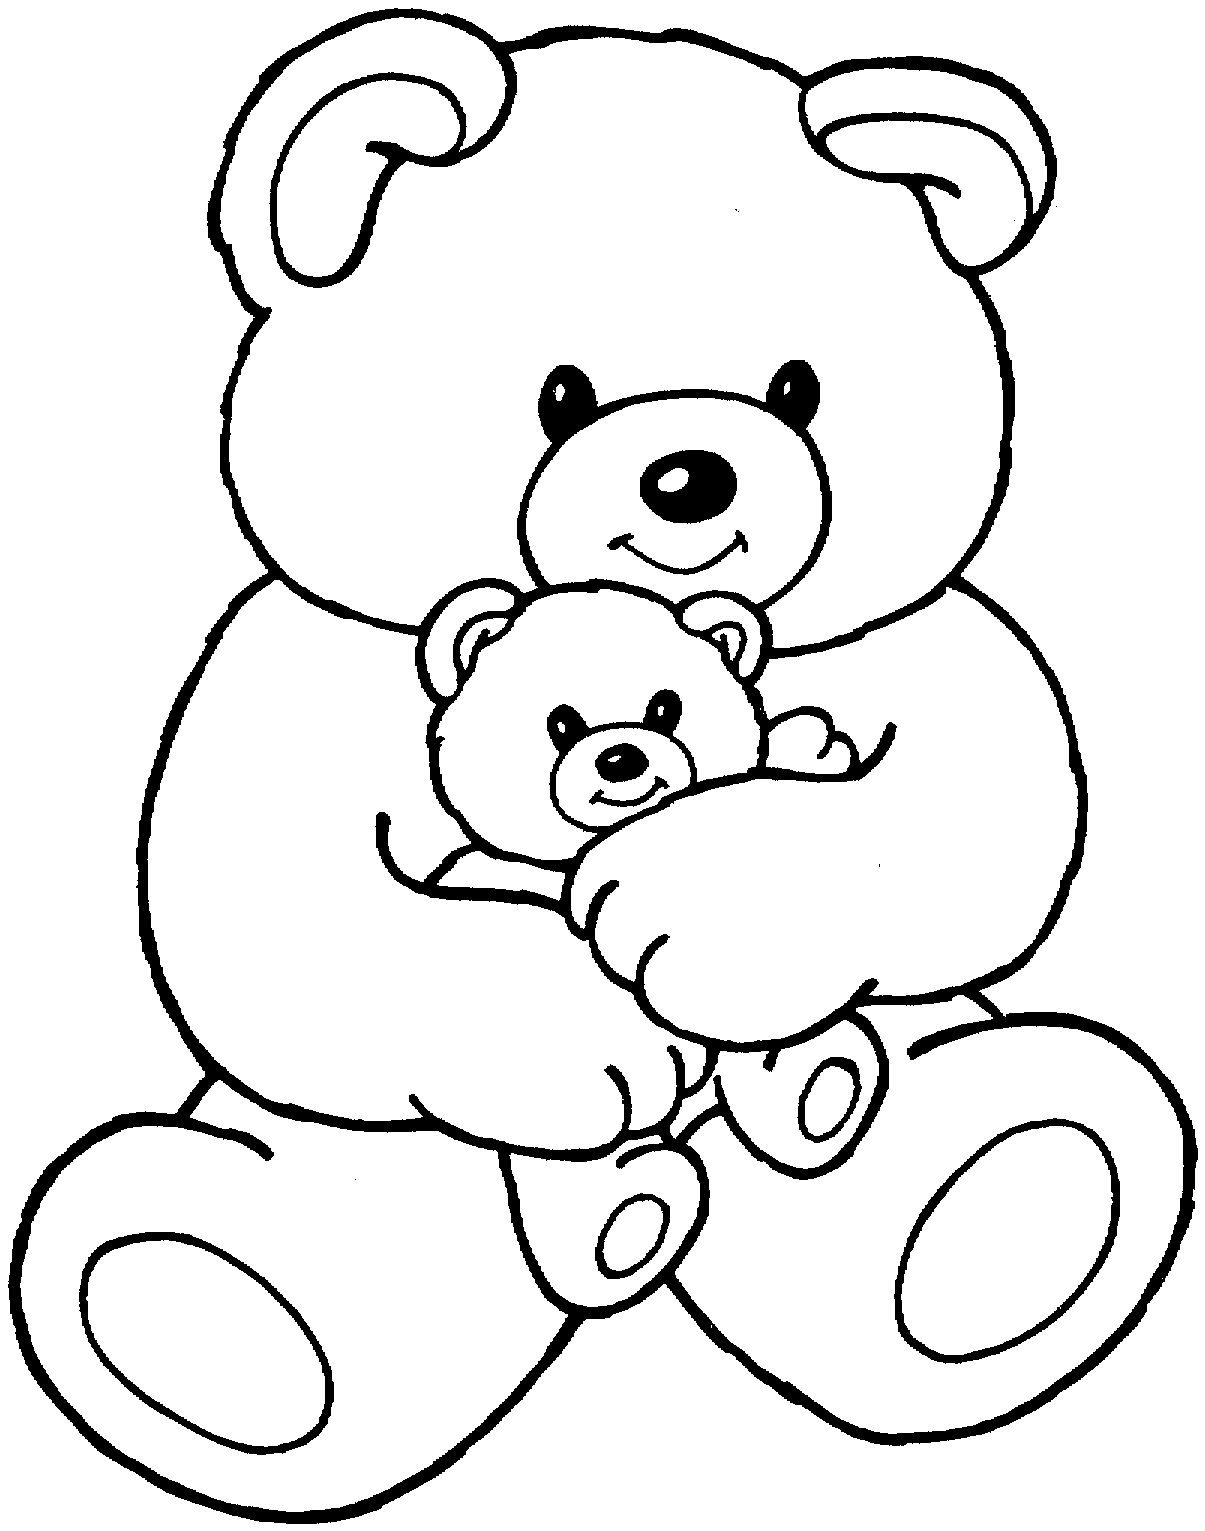 free coloring pages bears free bear coloring pages coloring free pages bears 1 1